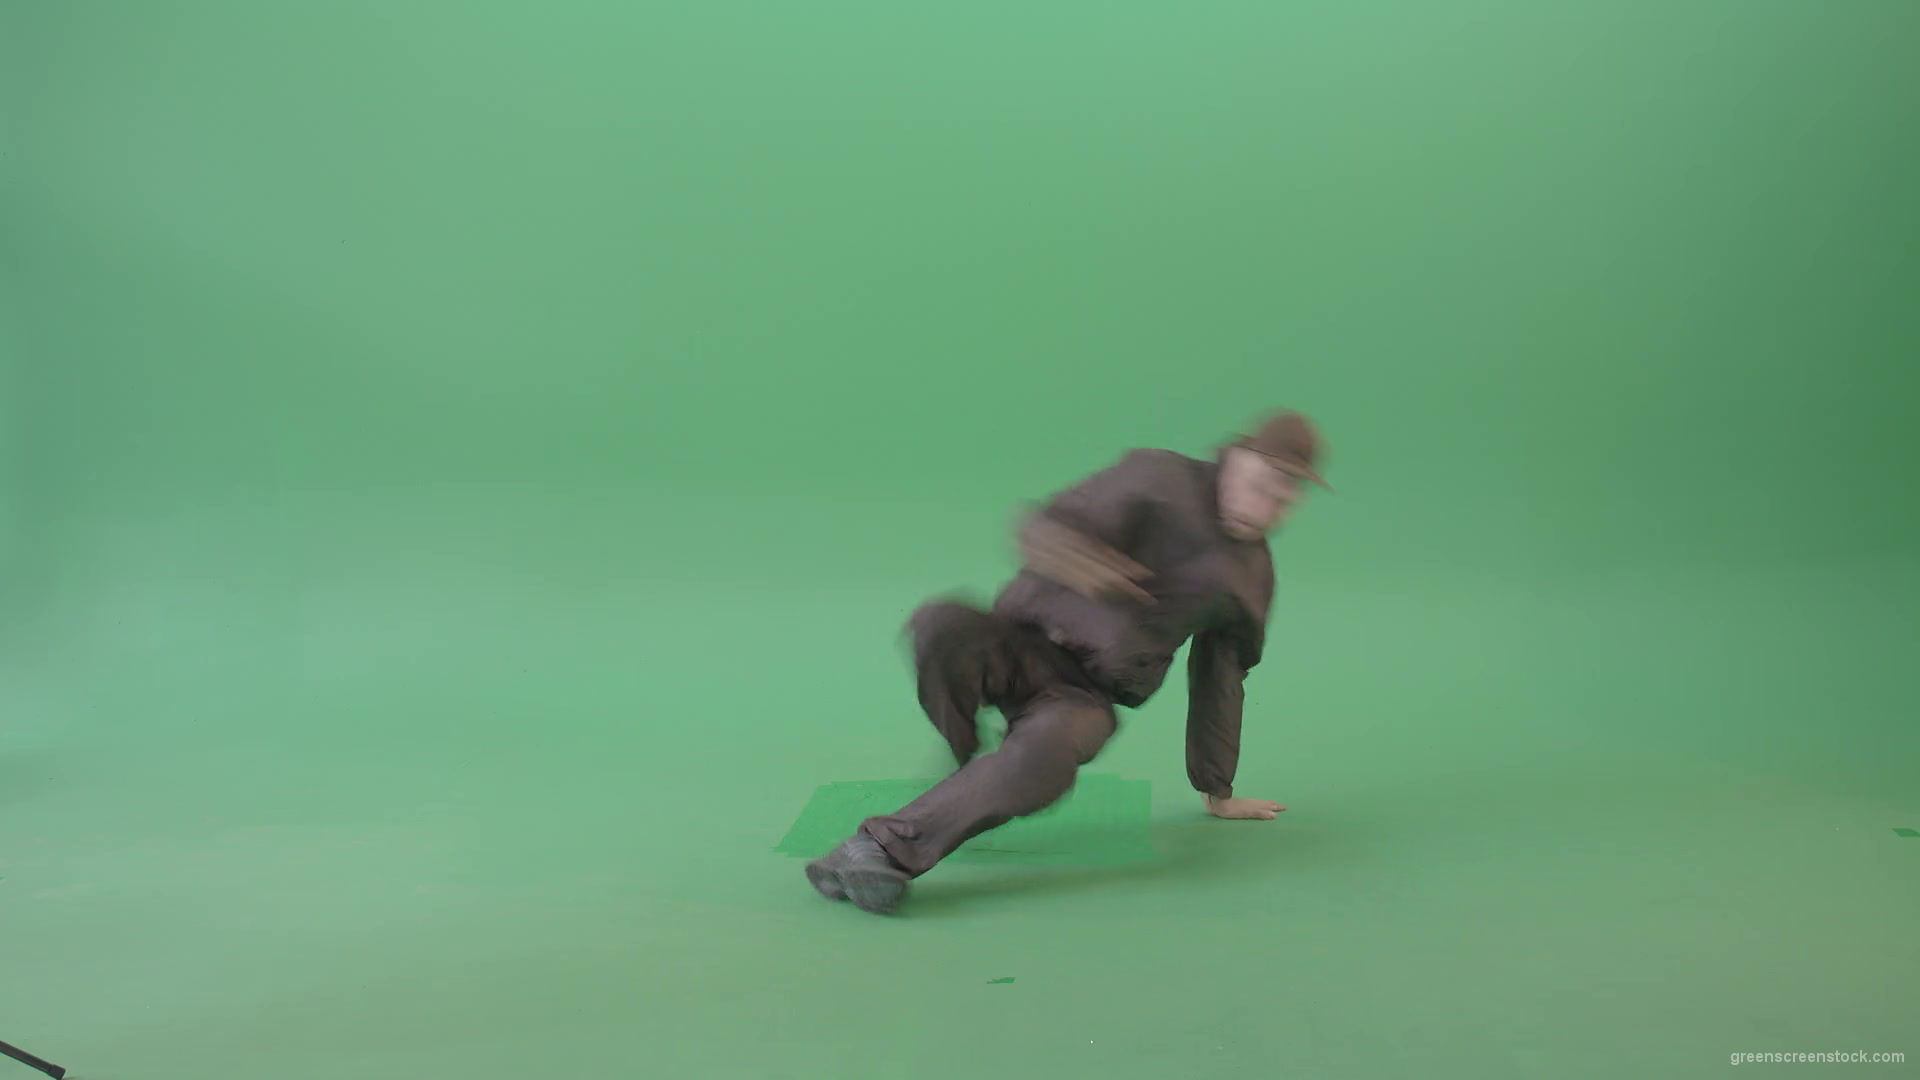 B-Boy-breakdance-man-making-power-moves-isolated-on-green-screen-4K-Video-Footage-1920_008 Green Screen Stock